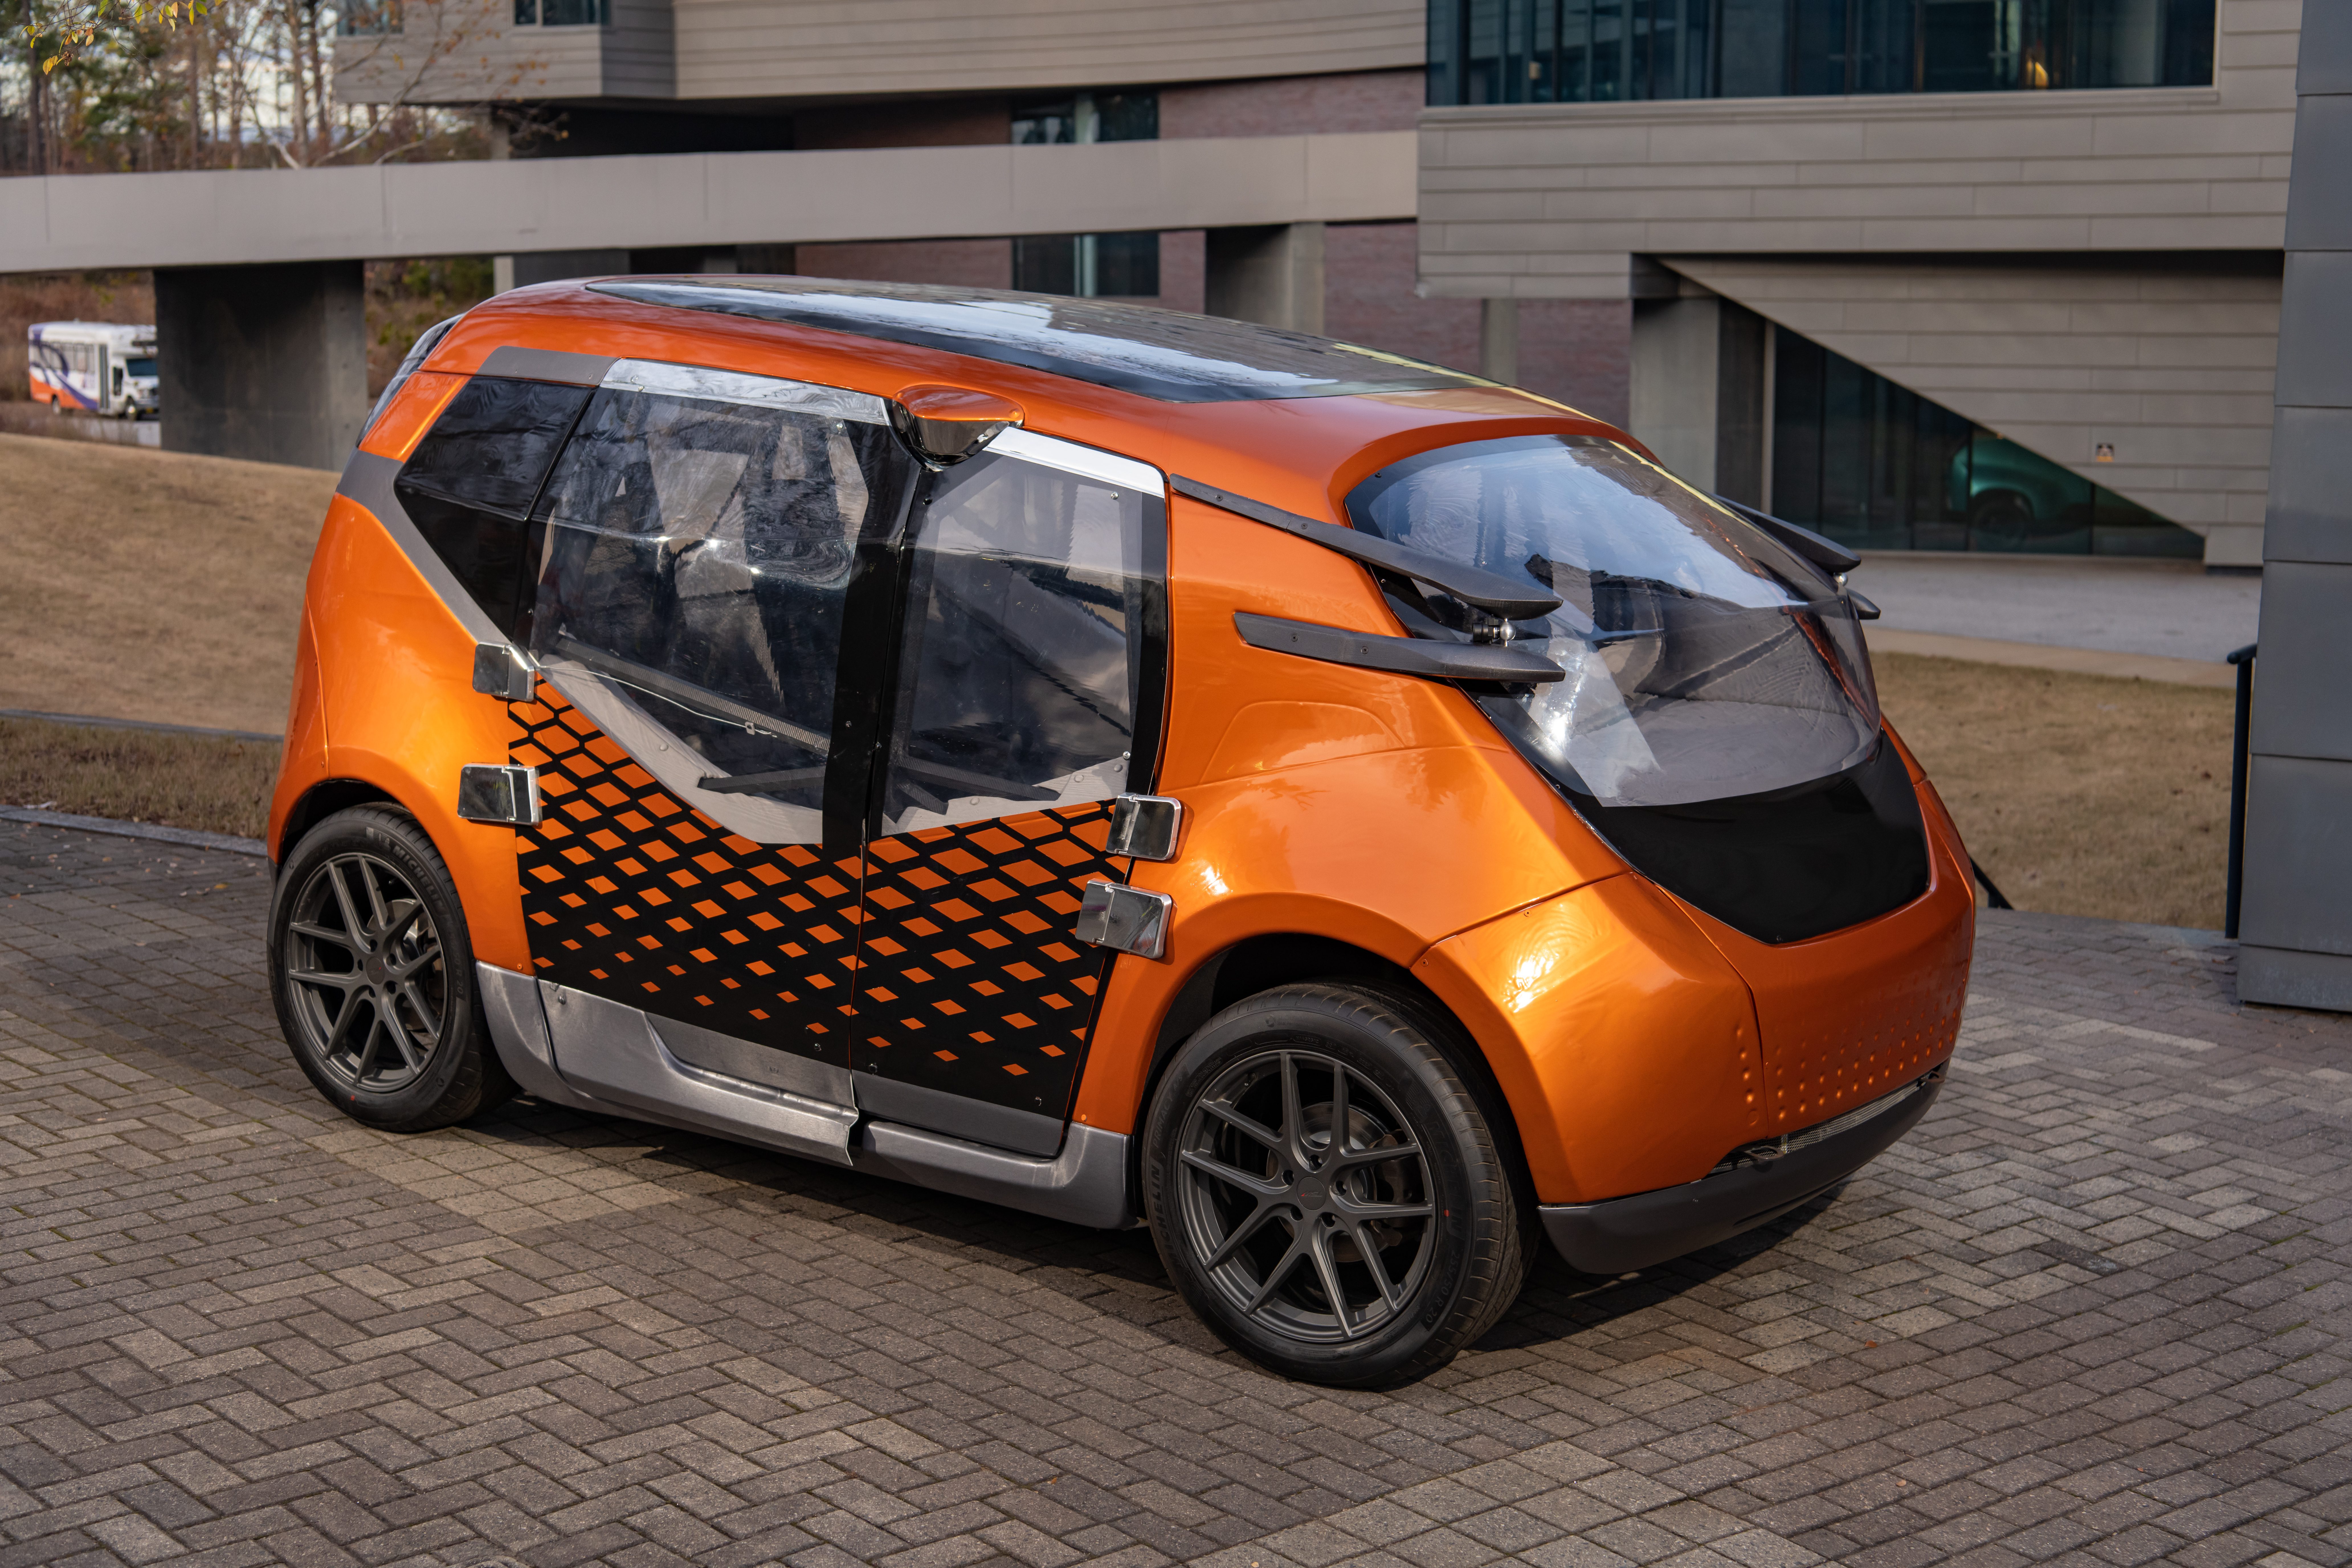 A futuristic orange car sits in an empty brick parking lot of a commercial complex.